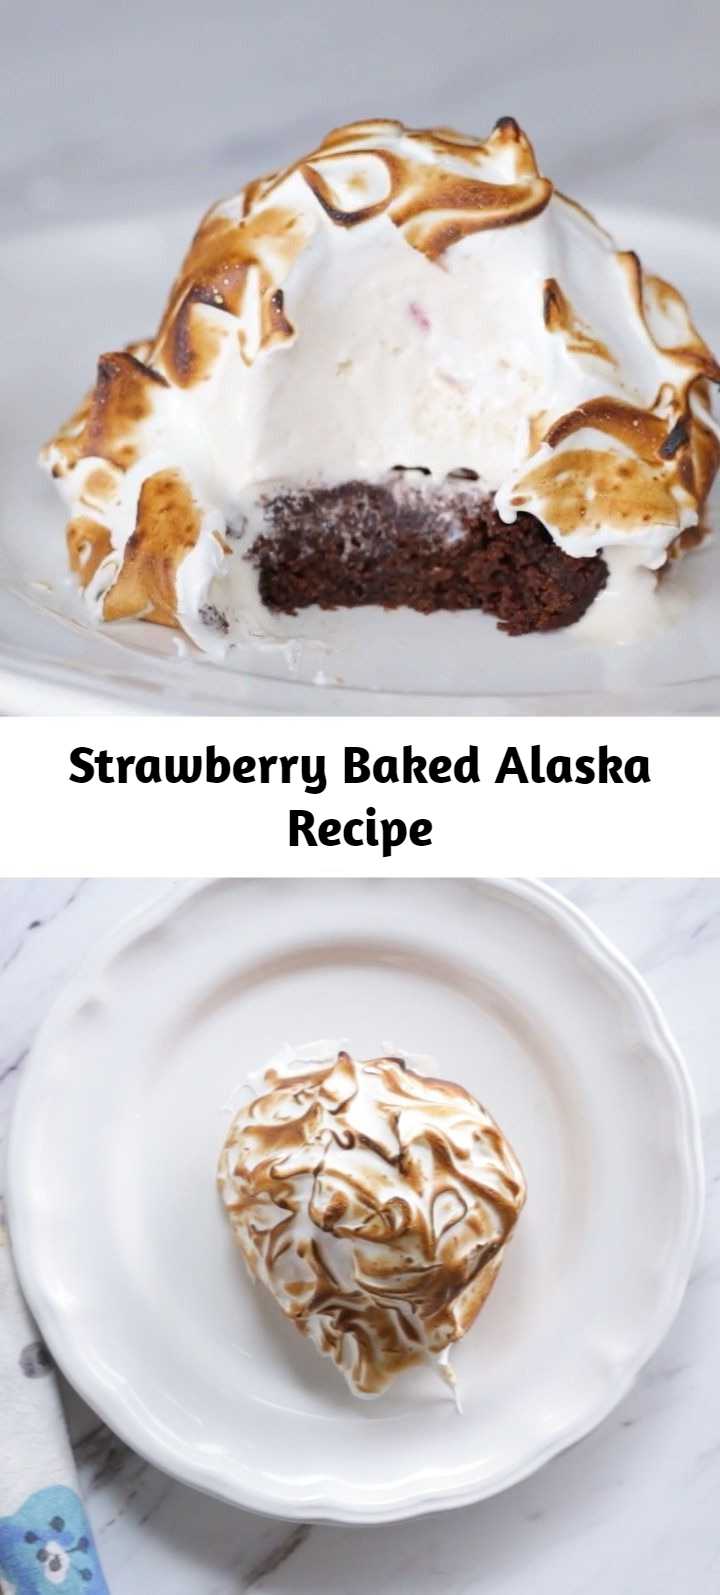 Strawberry Baked Alaska Recipe - Made with fresh fruit, this creamy dessert is berry delicious. A brownie base and a toasted cream top makes it easy to impress with this dish.